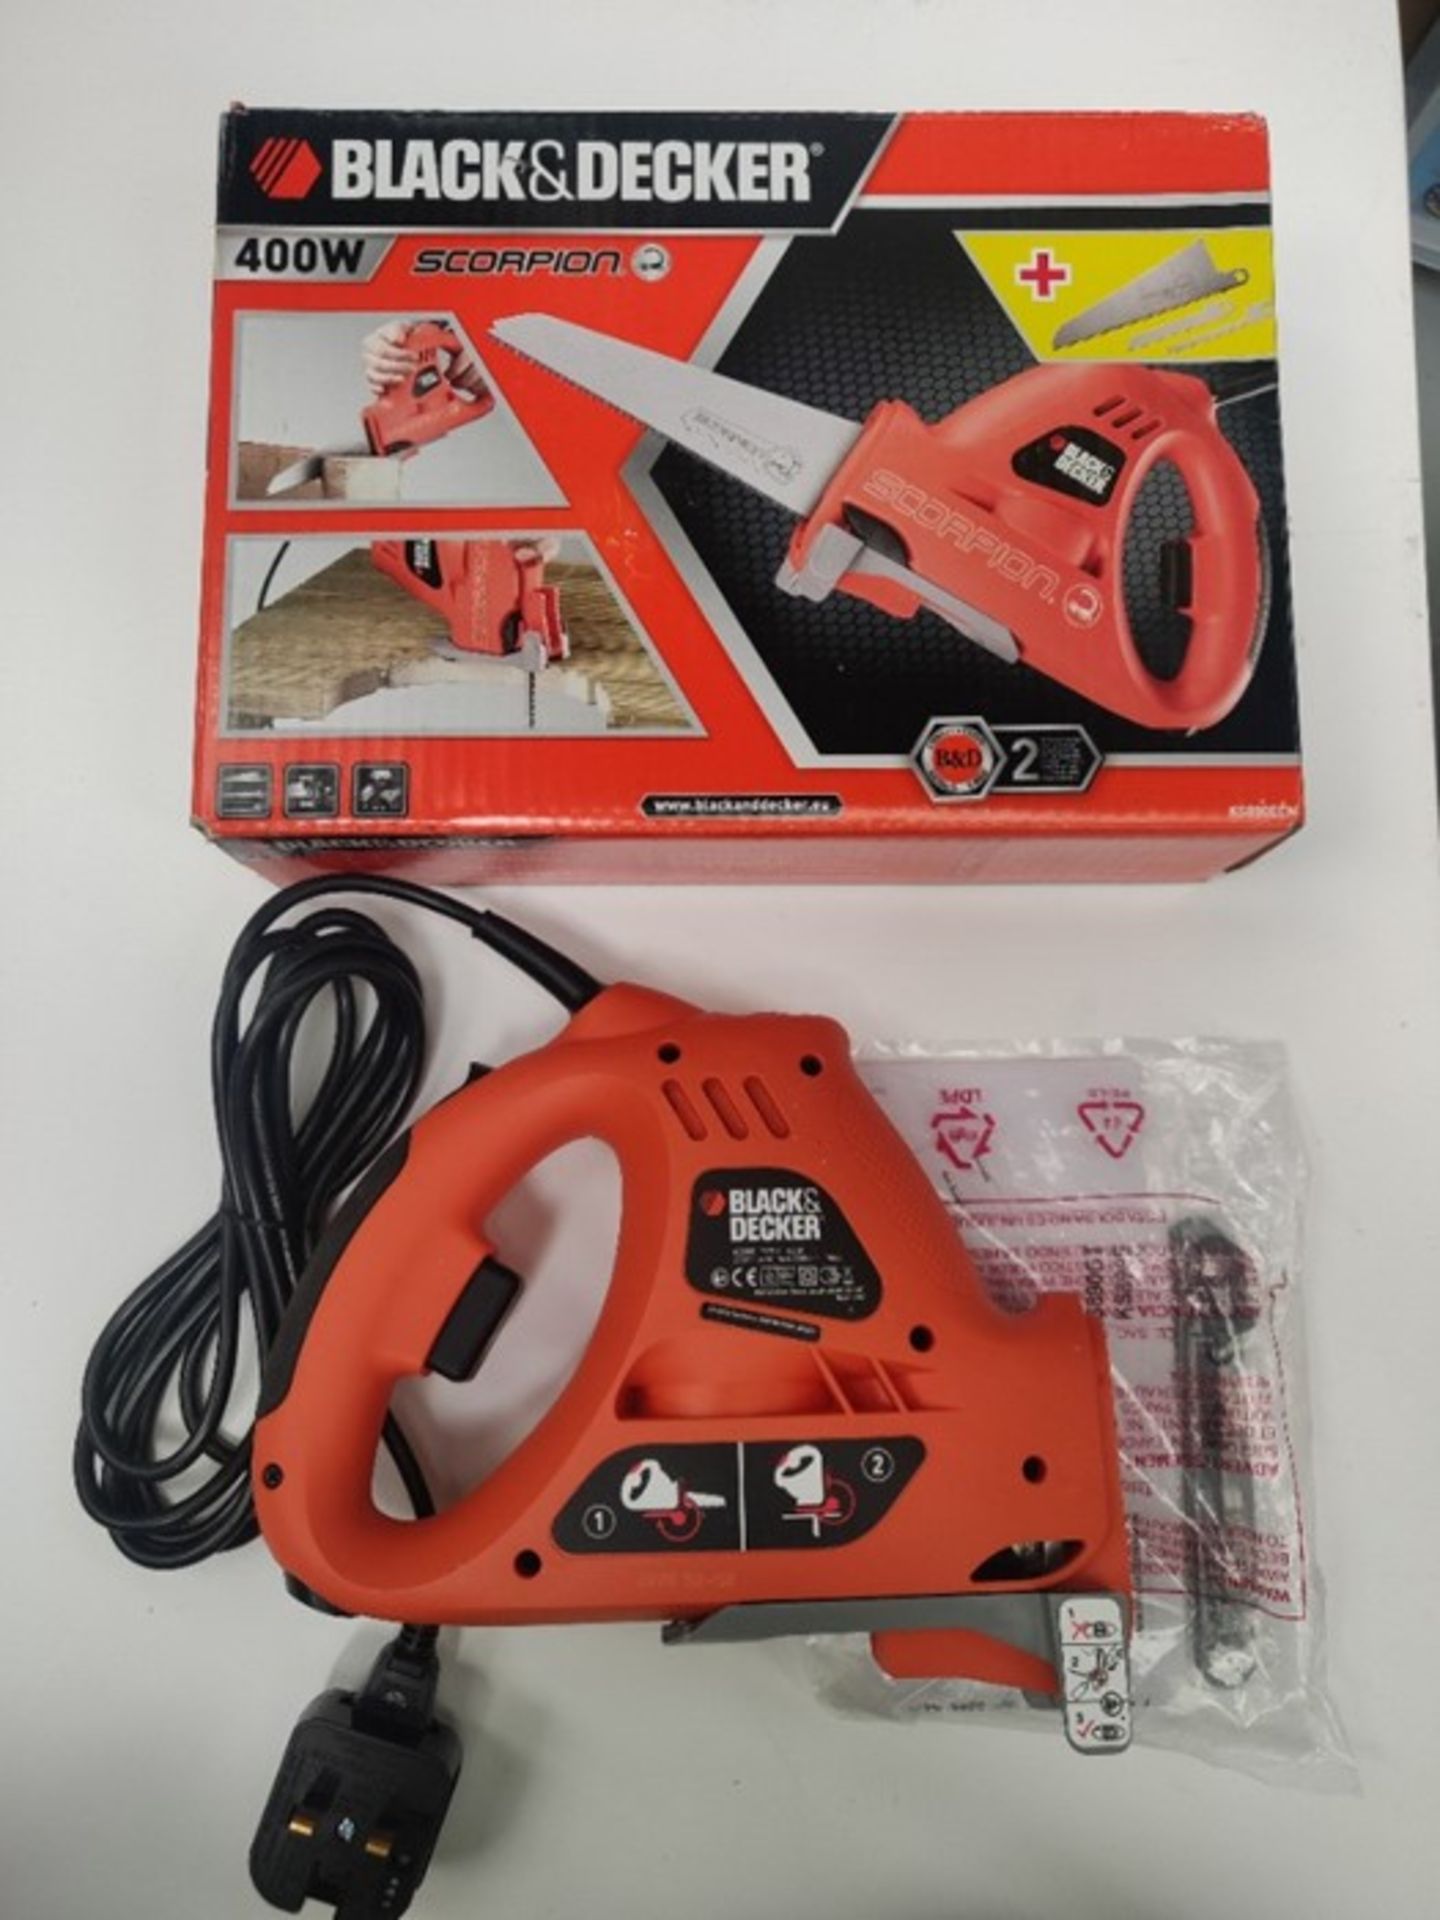 BLACK+DECKER 400 V Scorpion Electric Saw with 3 Blades and 10mm Stroke Length, KS890EC - Image 2 of 2